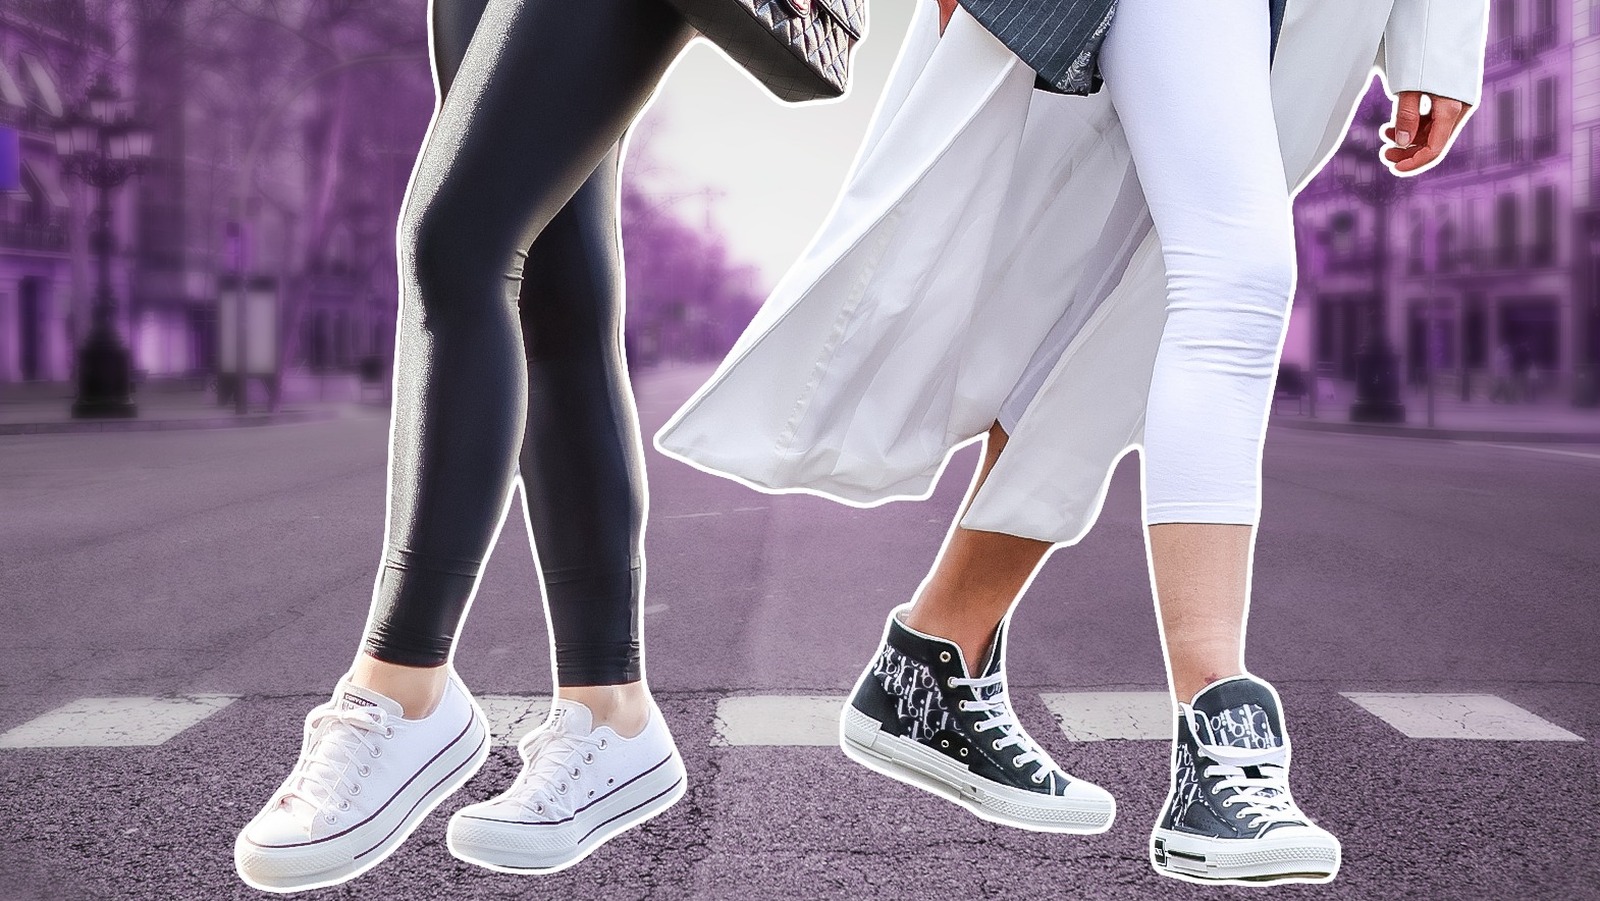 Wearing Canvas Sneakers With Leggings Is Outdated - Here's What To Wear  Instead